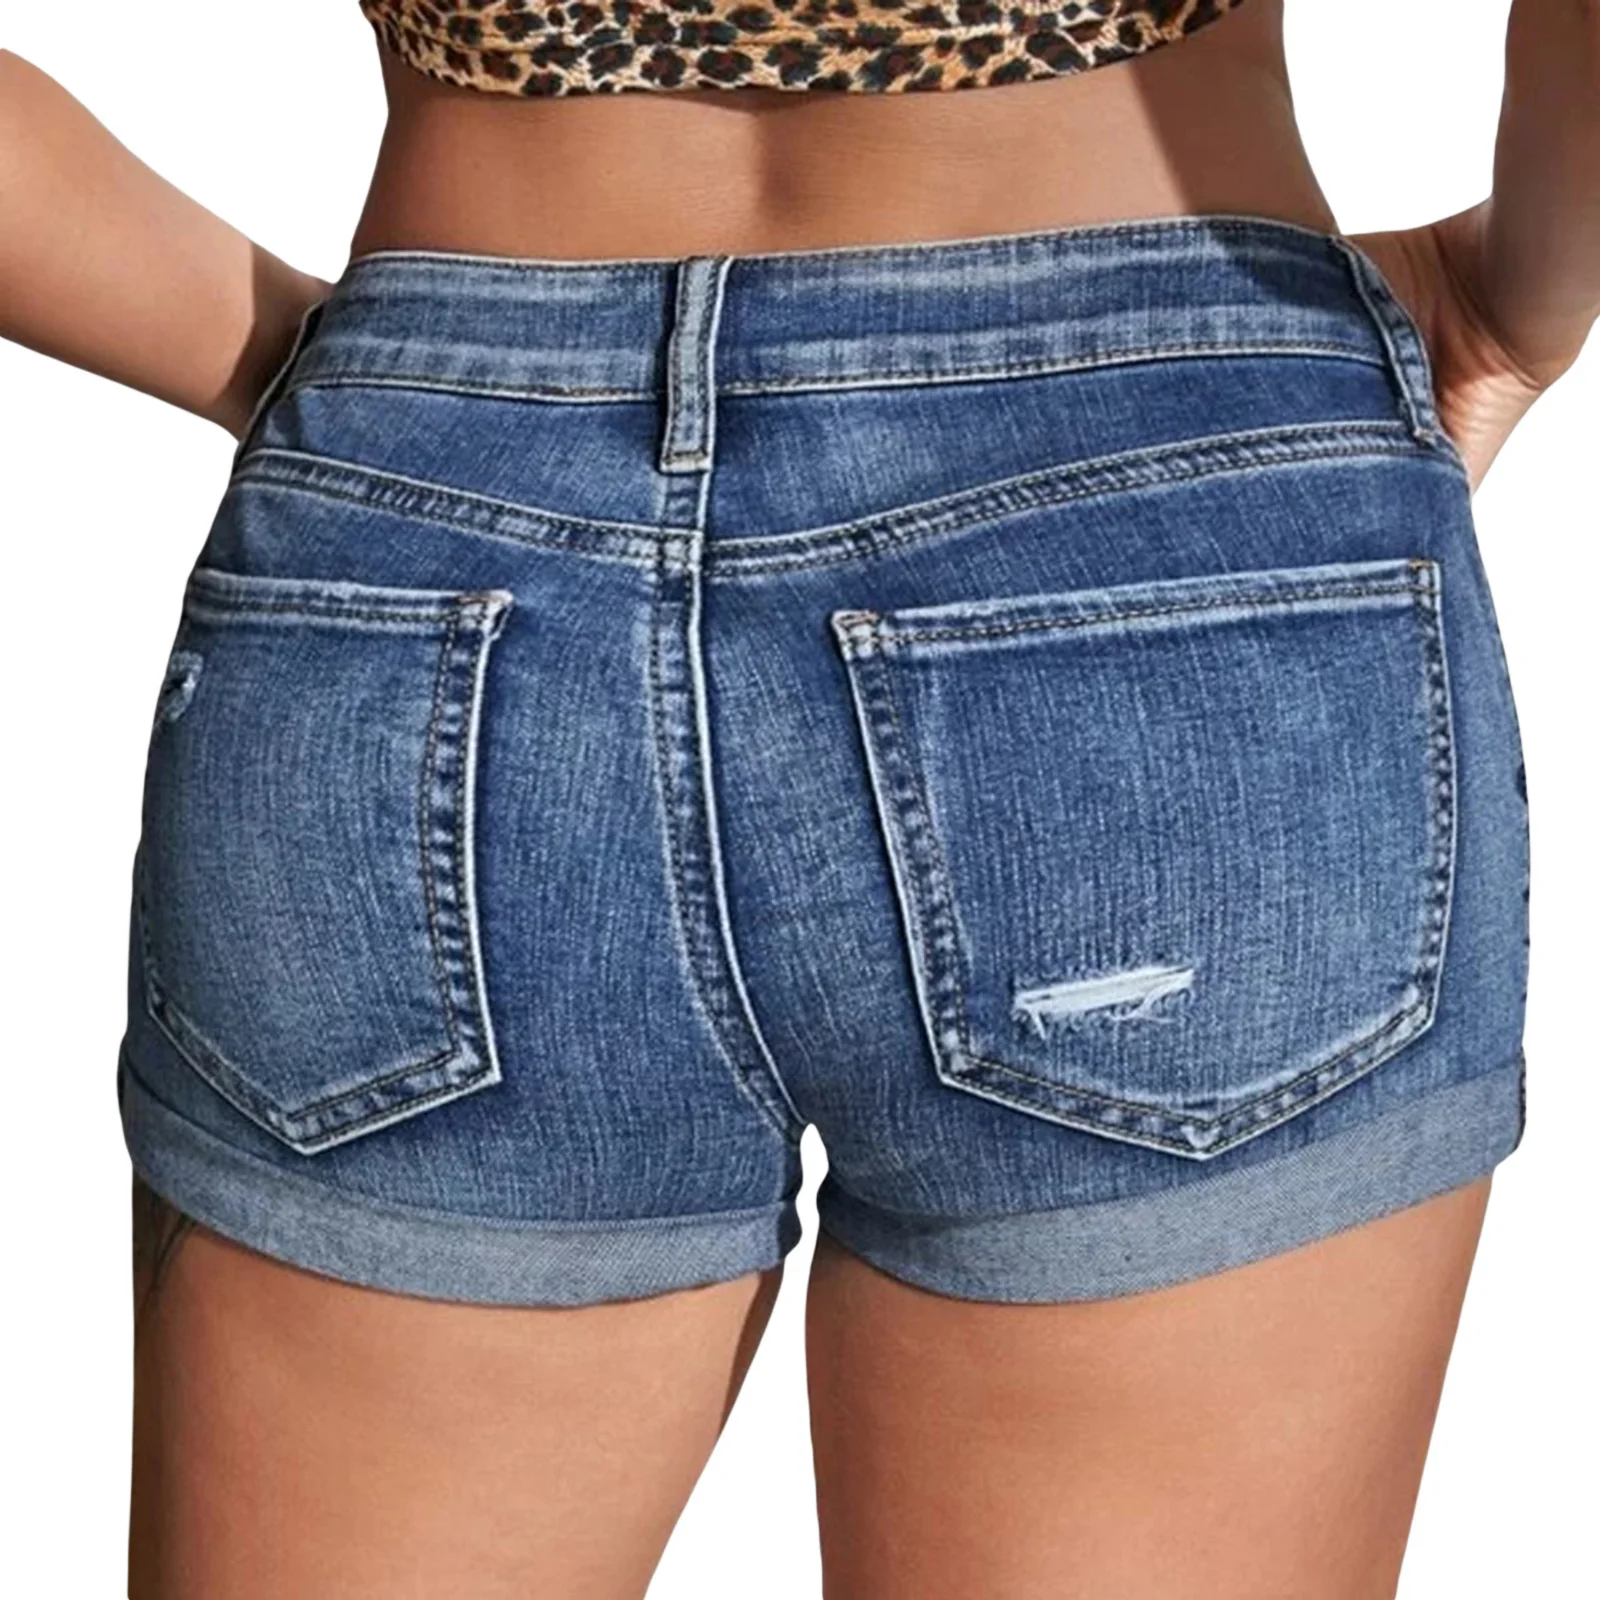 

New Arrival Stylish Womens Ripped Denim Shorts, Casual Mid Waist Rolled Cuff Distressed Stretchy Short Jeans